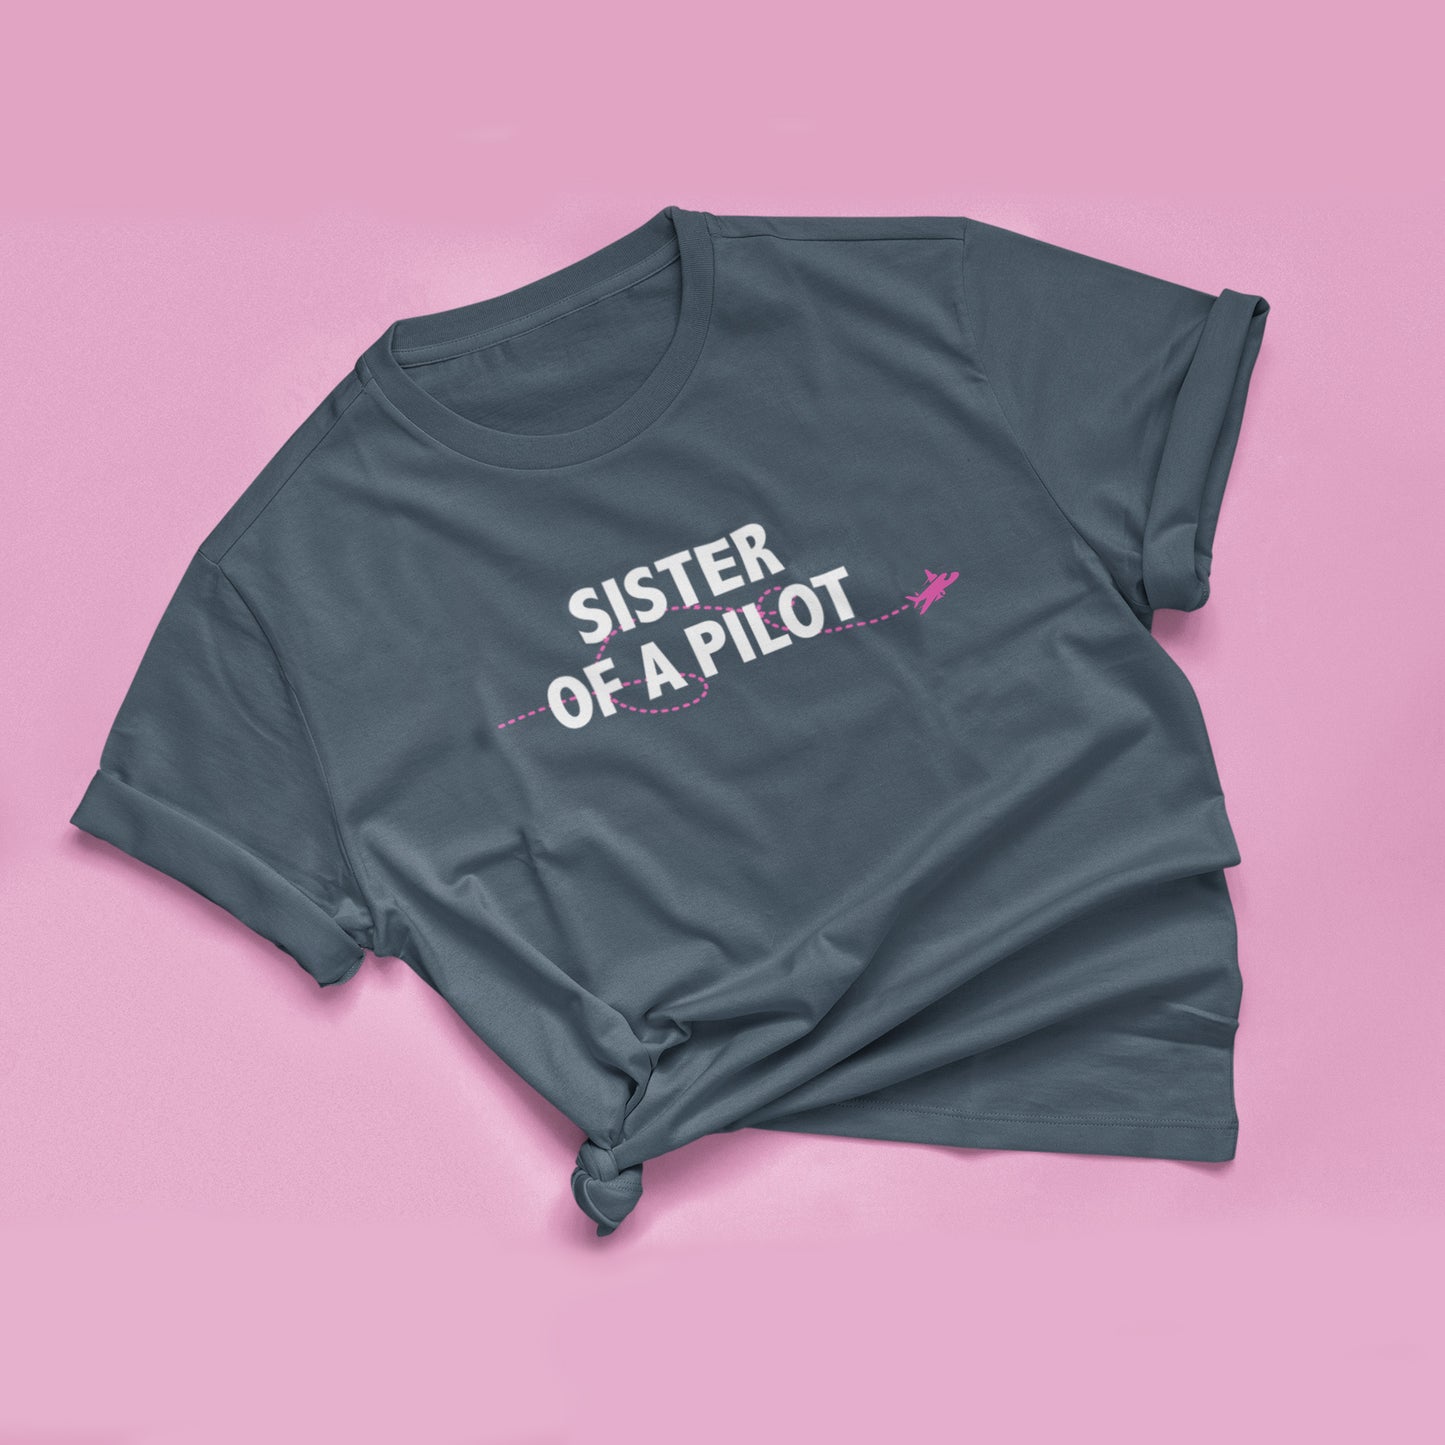 Sister of the/a Pilot - Youth T-shirt